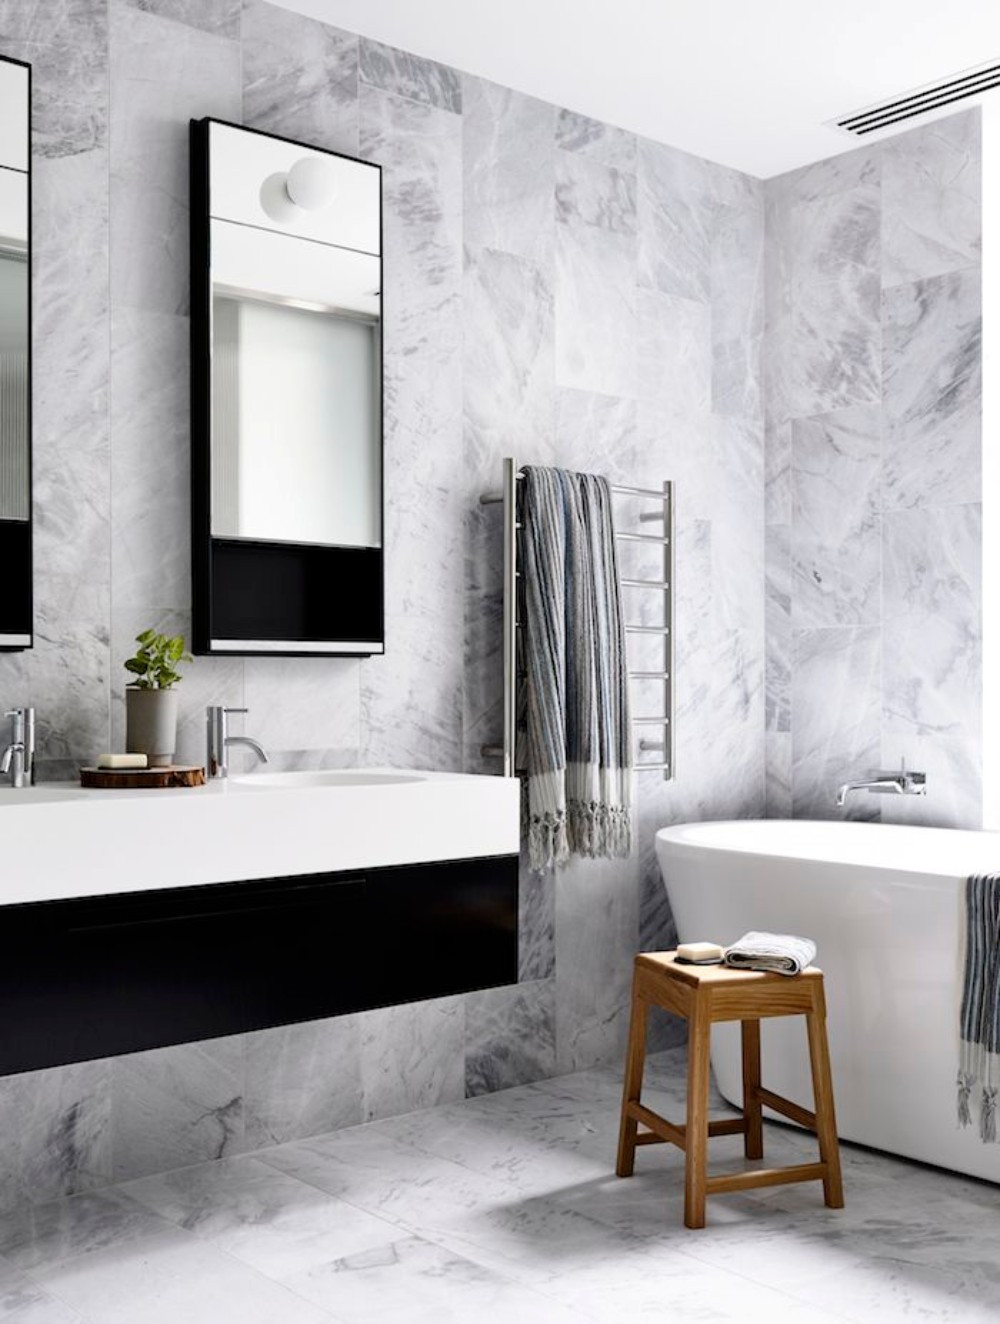 Black And Silver Bathroom Decor
 Get Inspired with 25 Black and White Bathroom Design Ideas